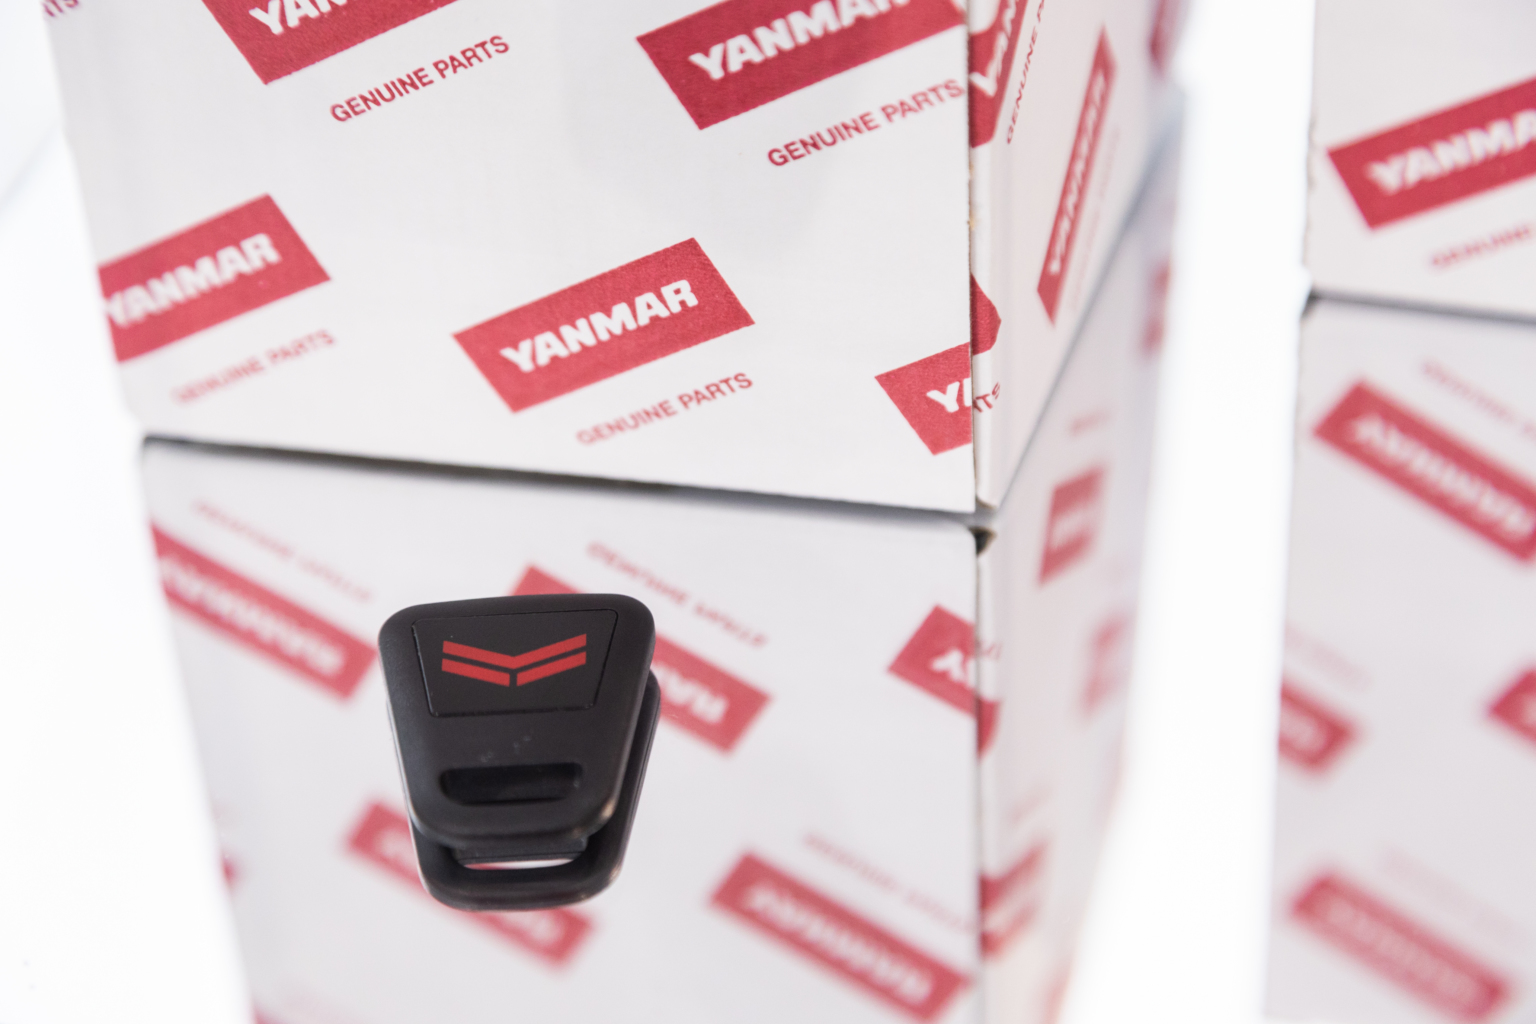 YANMAR Marine introduces the E-Key for wireless communication with VC20 Vessel Control System